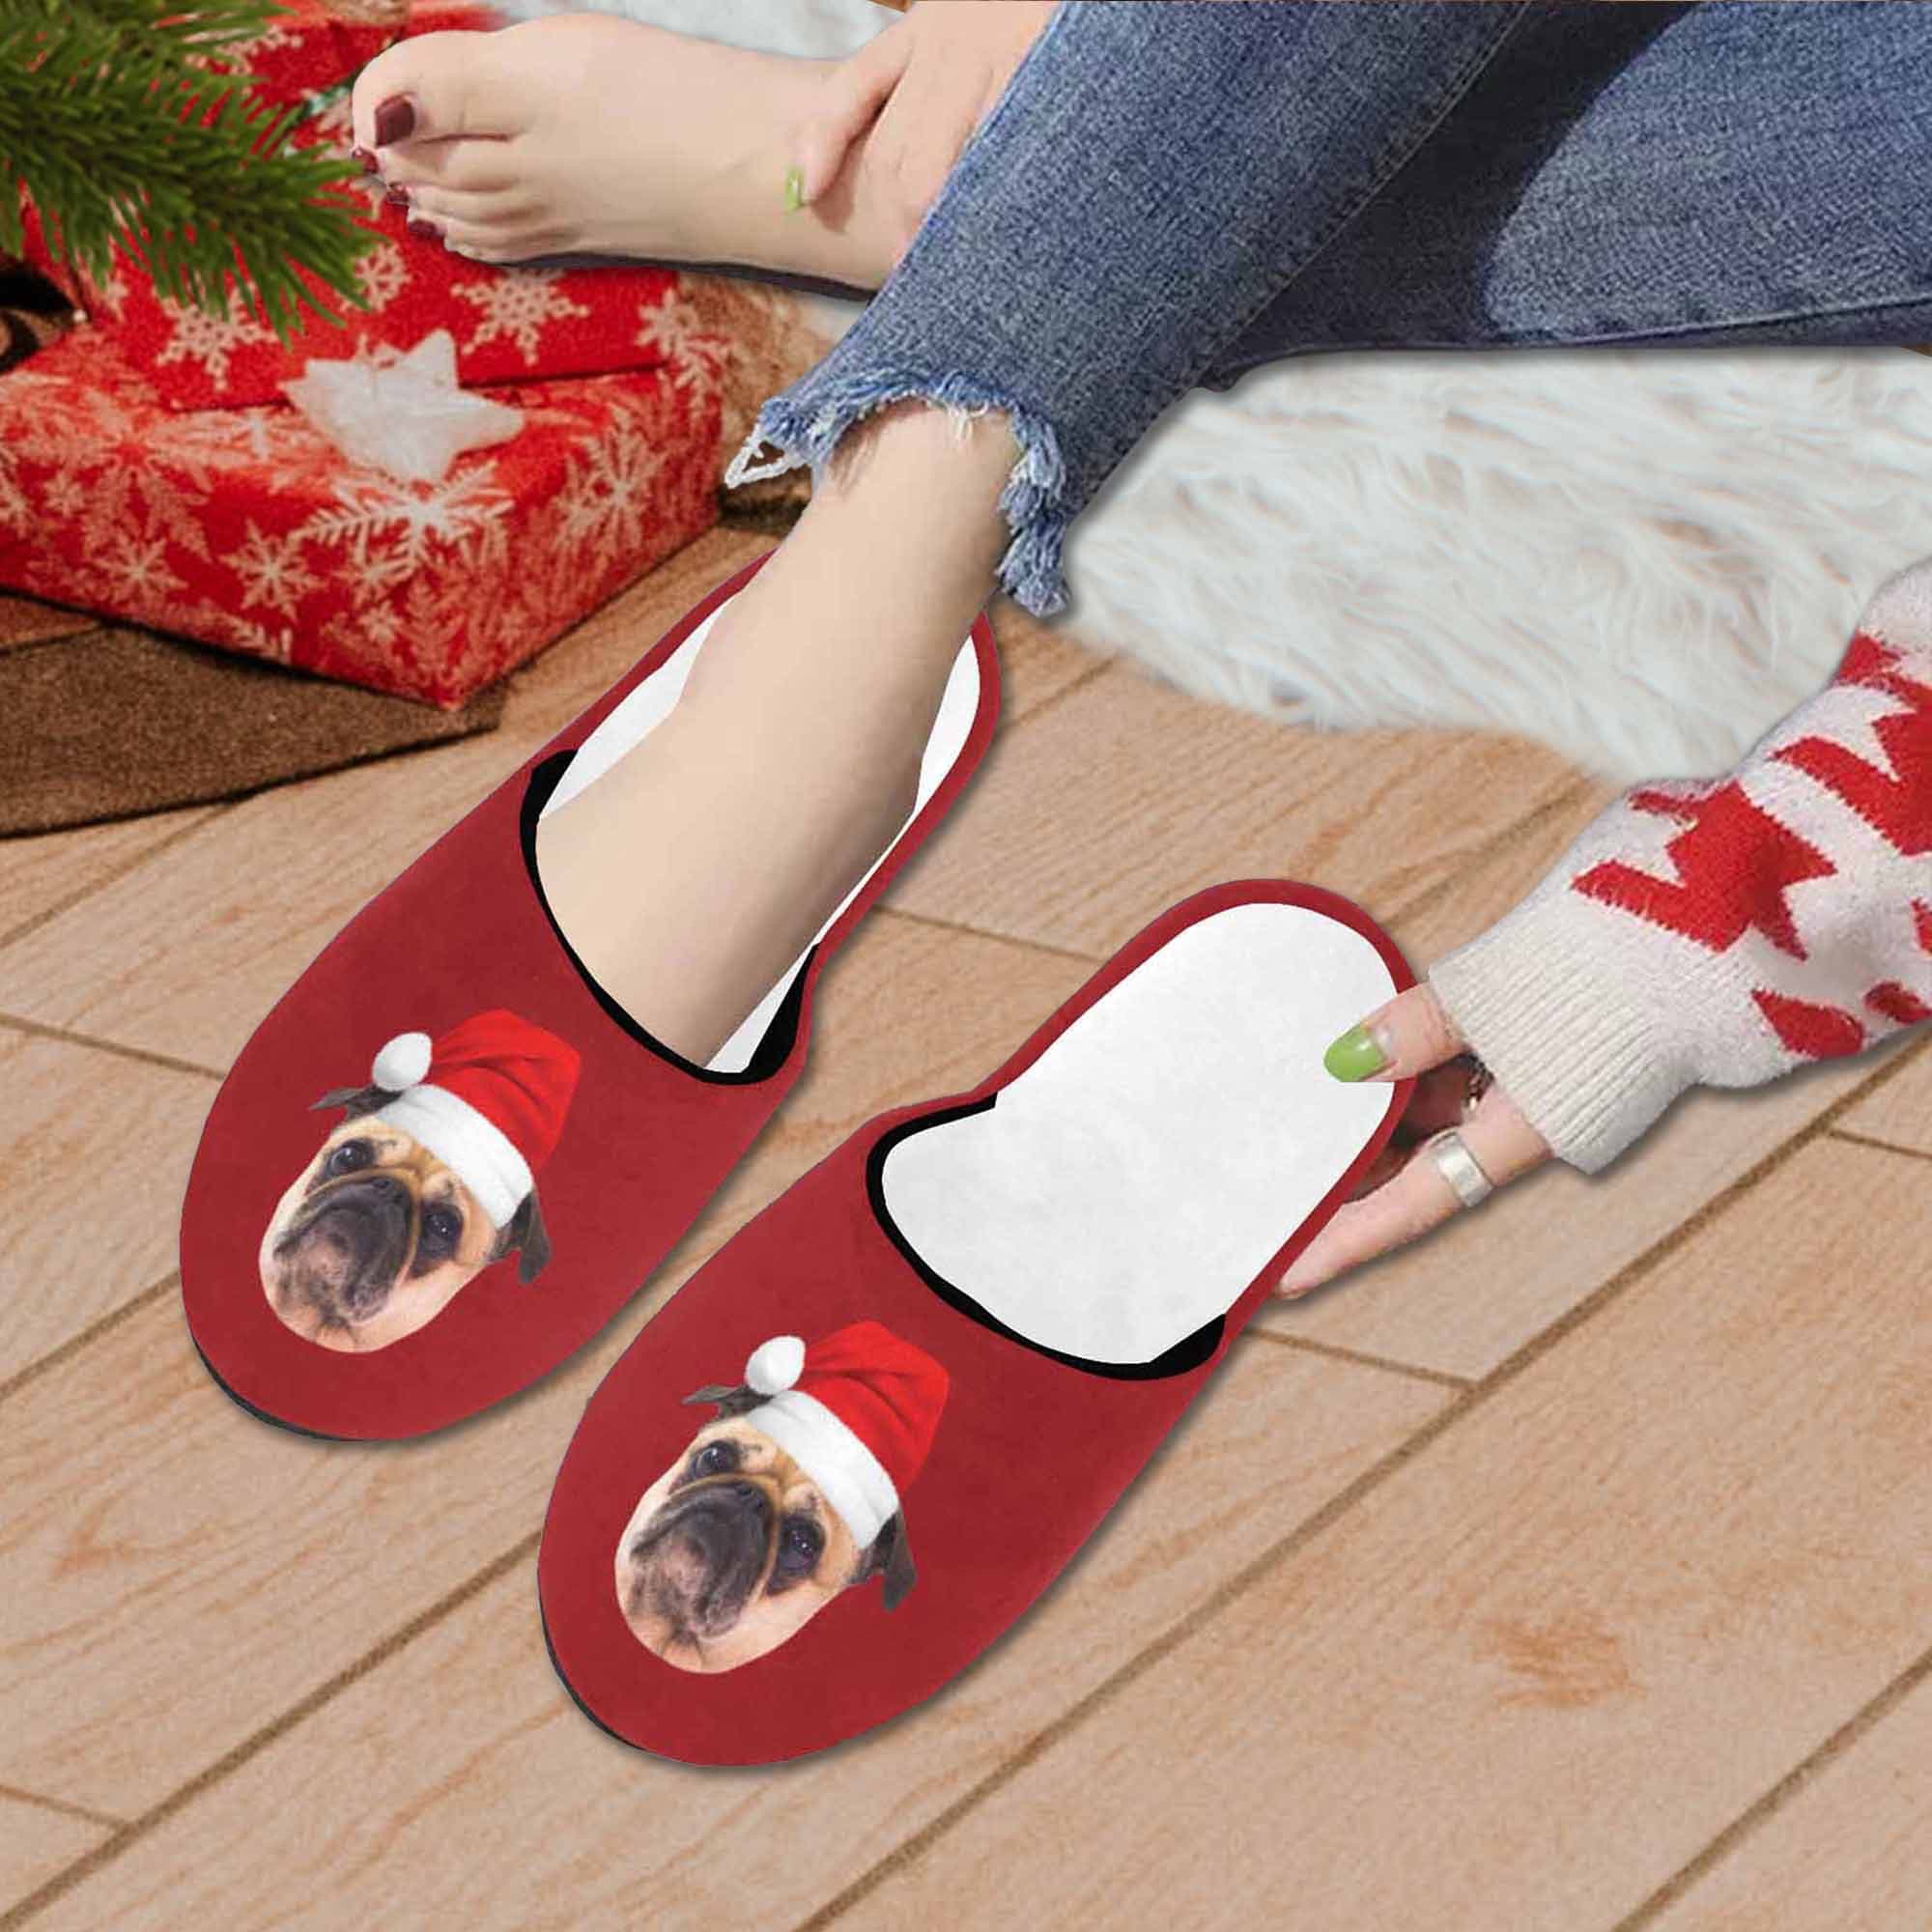 tonguk 1Pcs Multifunction Dust Floor Cleaning Slippers Shoe Mop House Clean Shoe Cover Microfiber Mop Shoe Dust Floor Cleaning Slipper 